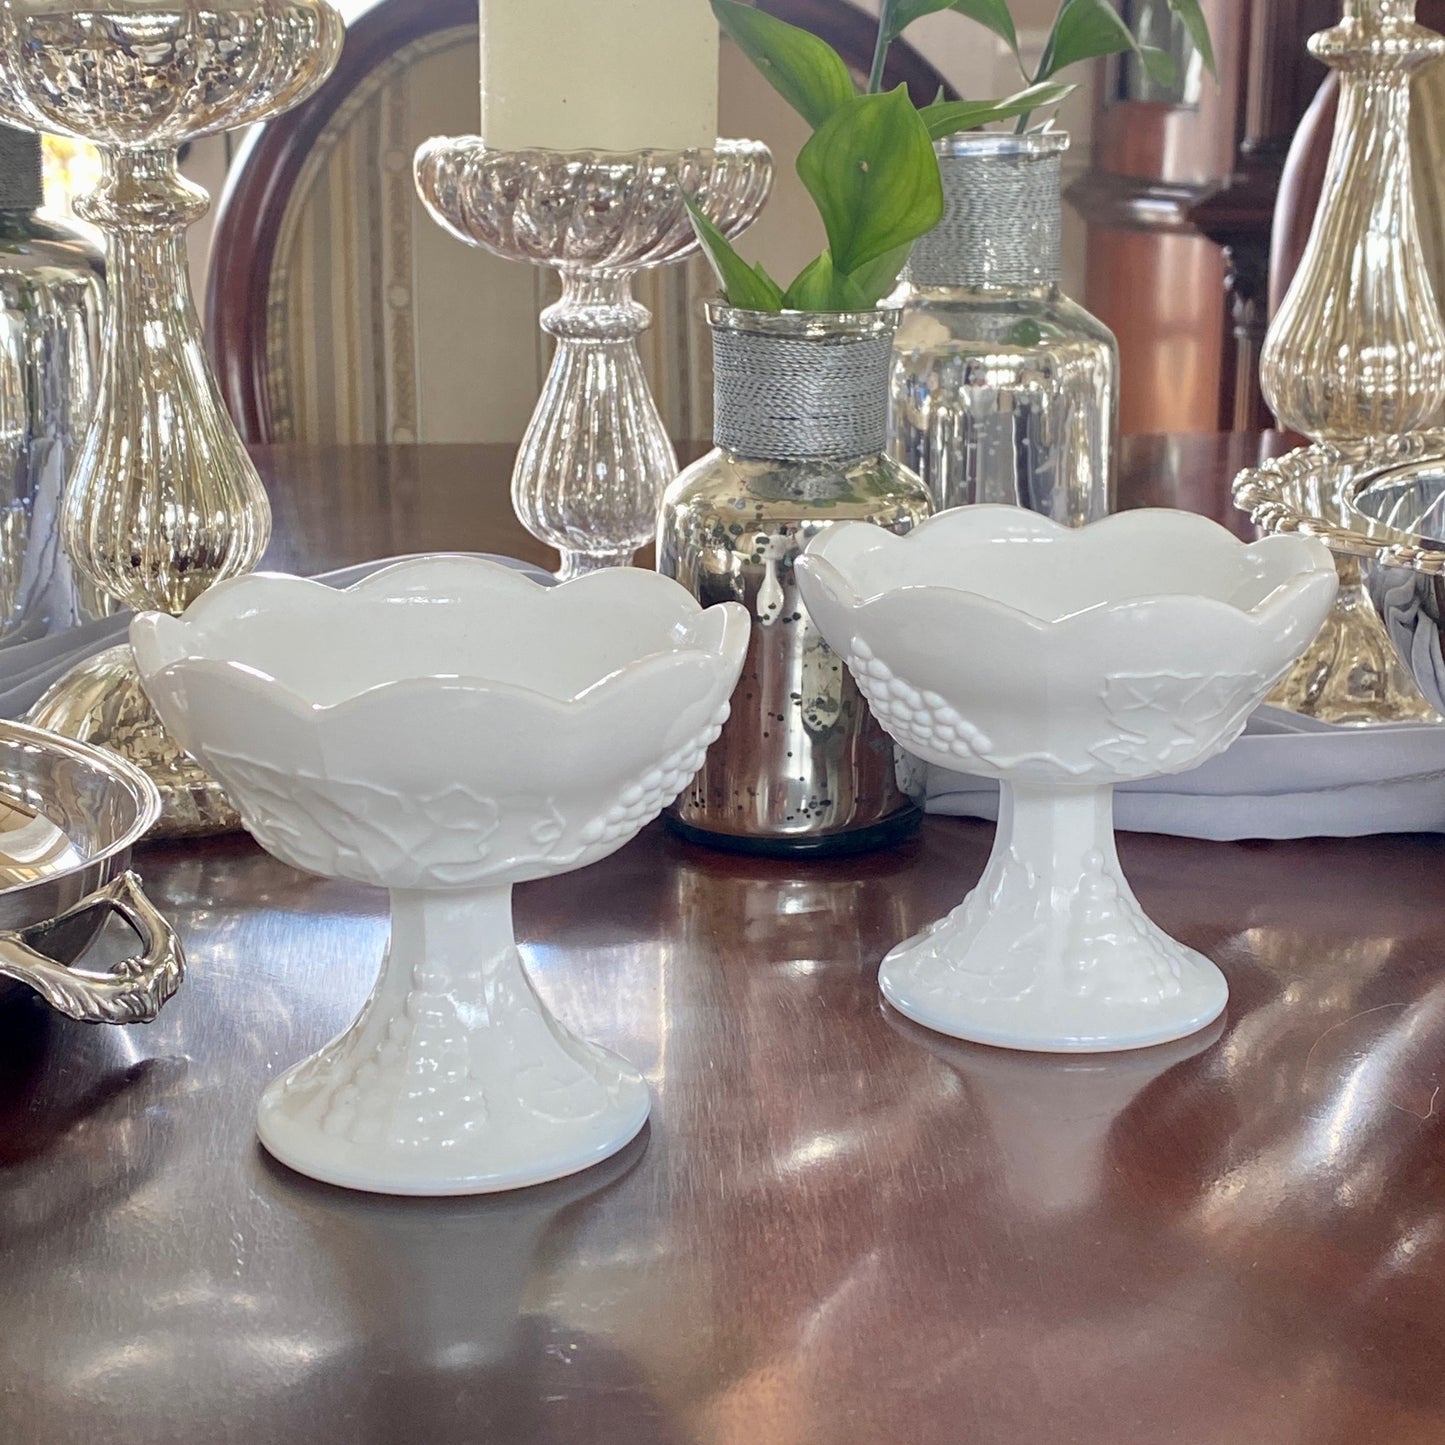 Pair of Milk Glass Candlestick Holders/Candy Dishes